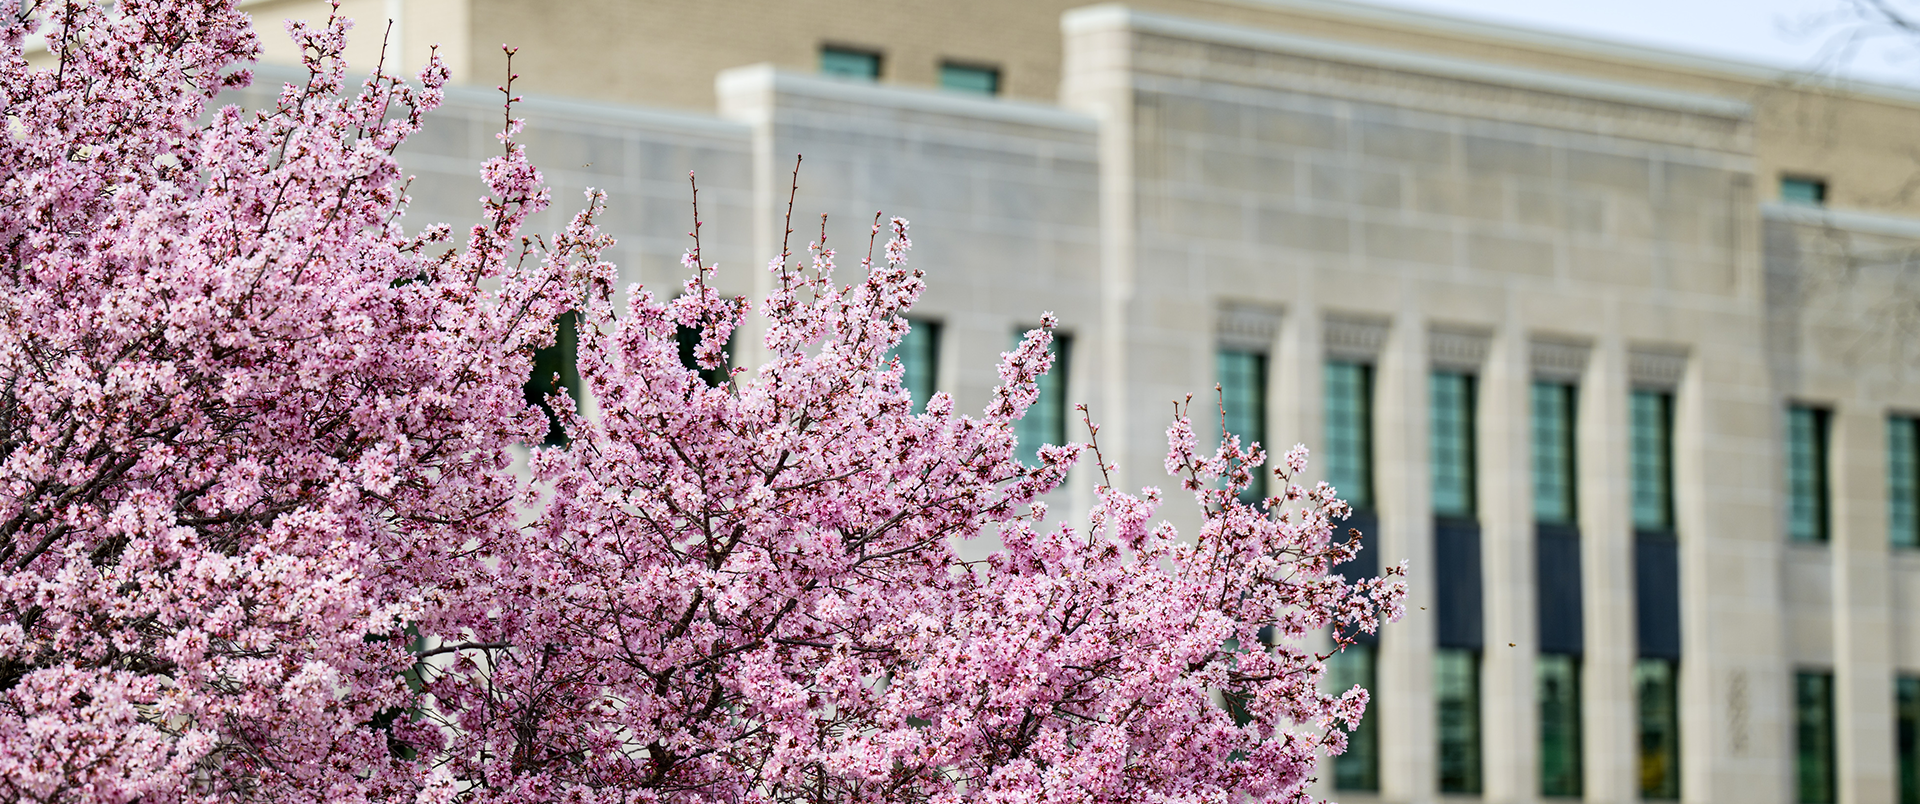 Cherry blossom blooming in front of municipal building